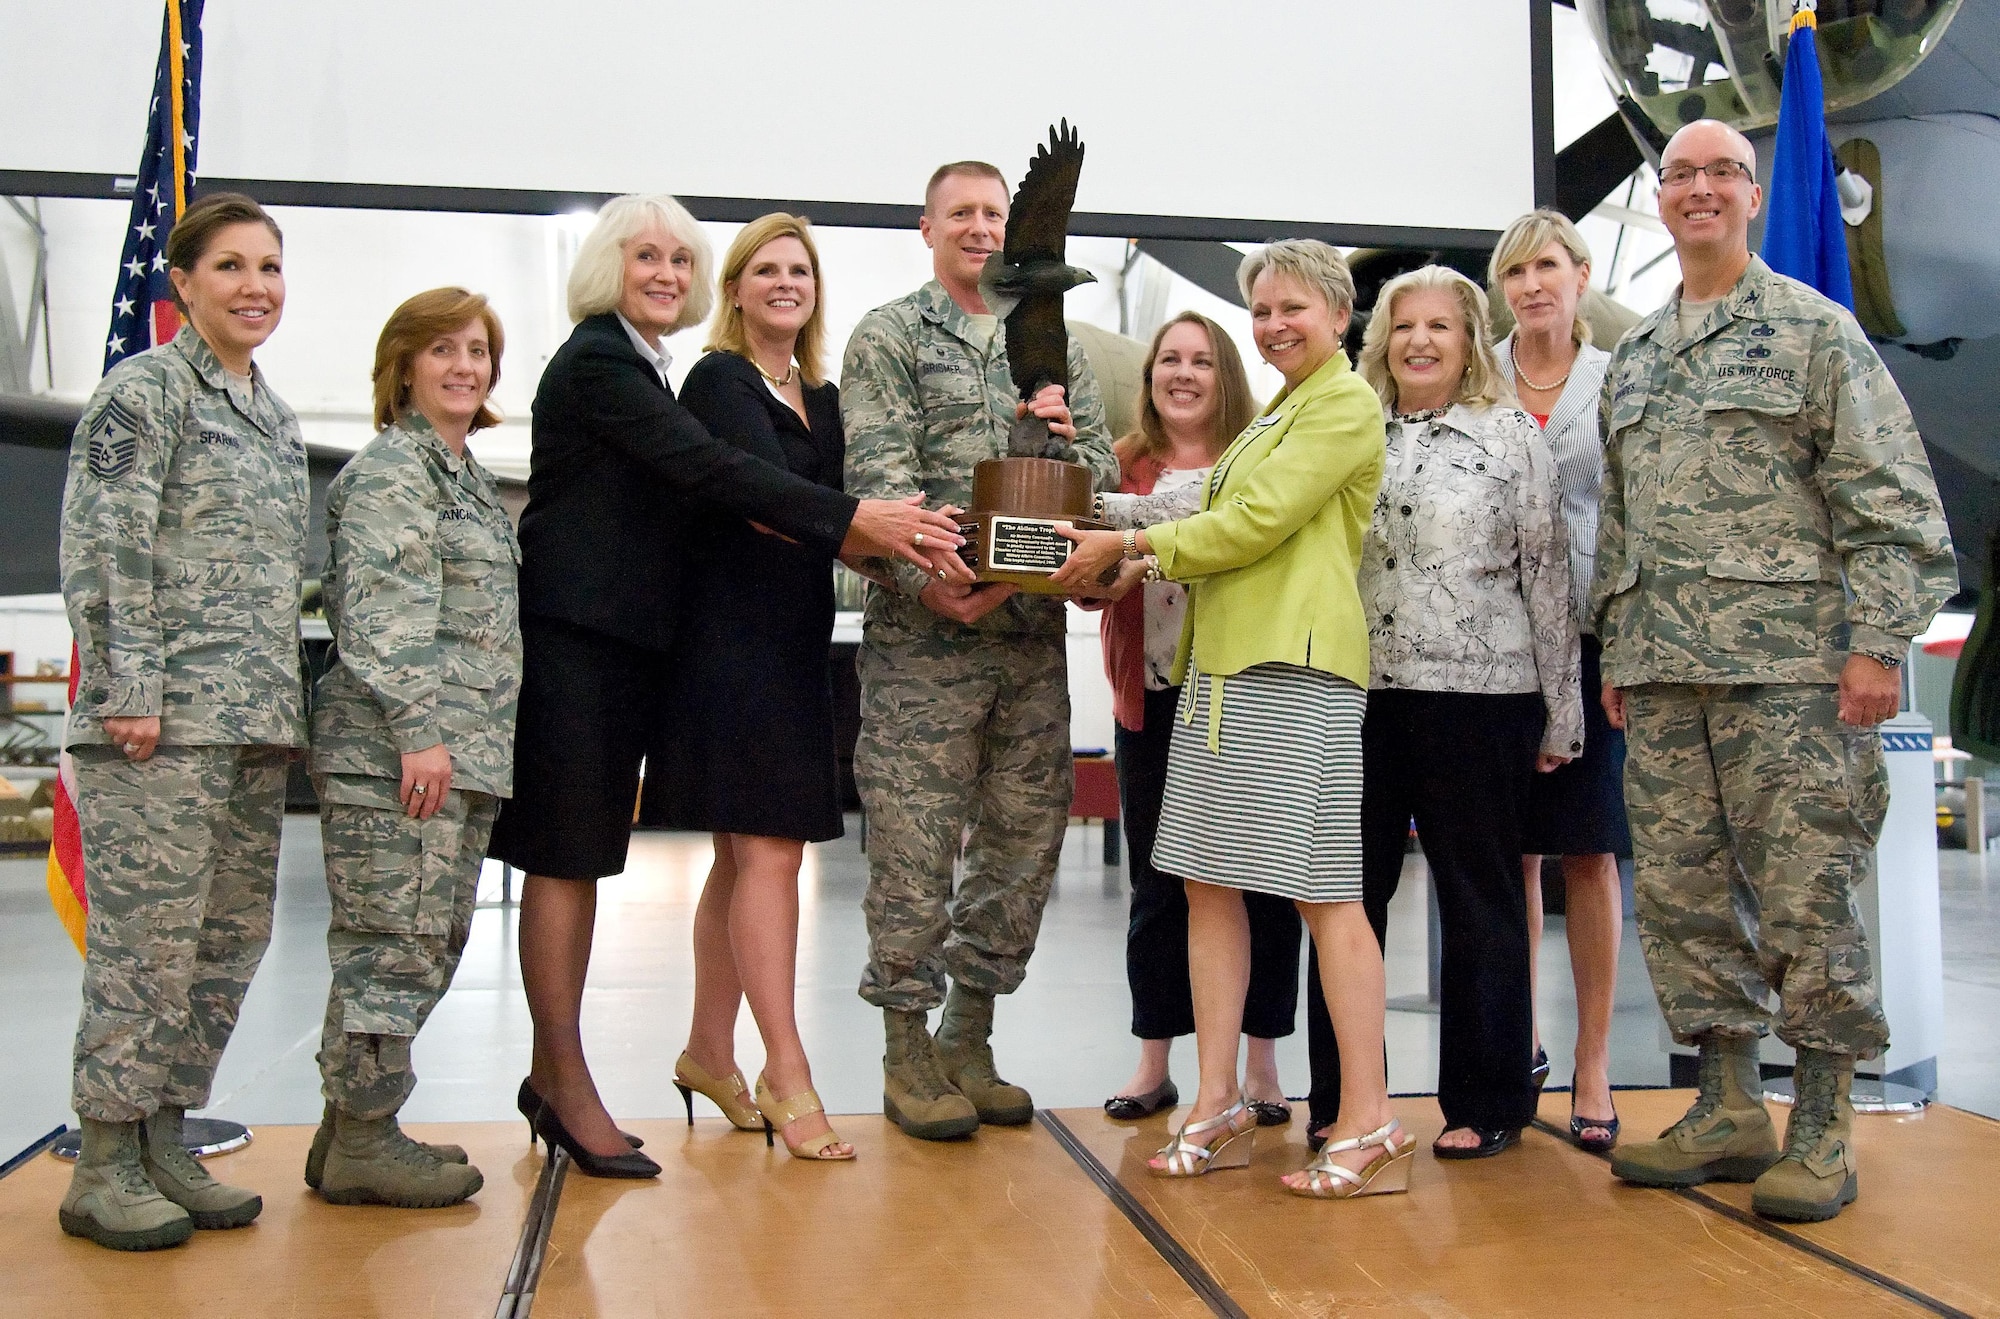 Col. Michael W. Grismer Jr., 436th Airlift Wing commander, and Judy Diogo, Central Delaware Chamber of Commerce president, hold the 2015 Abilene Trophy during the presentation ceremony July 13, 2016, at the Air Mobility Command Museum on Dover Air Force Base, Del. The Abilene Trophy, previously known as the Air Mobility Community Support Award which was established in 1998, is awarded annually to a civilian community for outstanding support to a nearby Air Mobility Command base. Pictured on stage with Grismer and Diogo were representatives of the 436th and 512th Airlift Wings, Air Force Mortuary Affairs Operations, Abilene Chamber of Commerce and the CDCC. (U.S. Air Force photo/Roland Balik) 